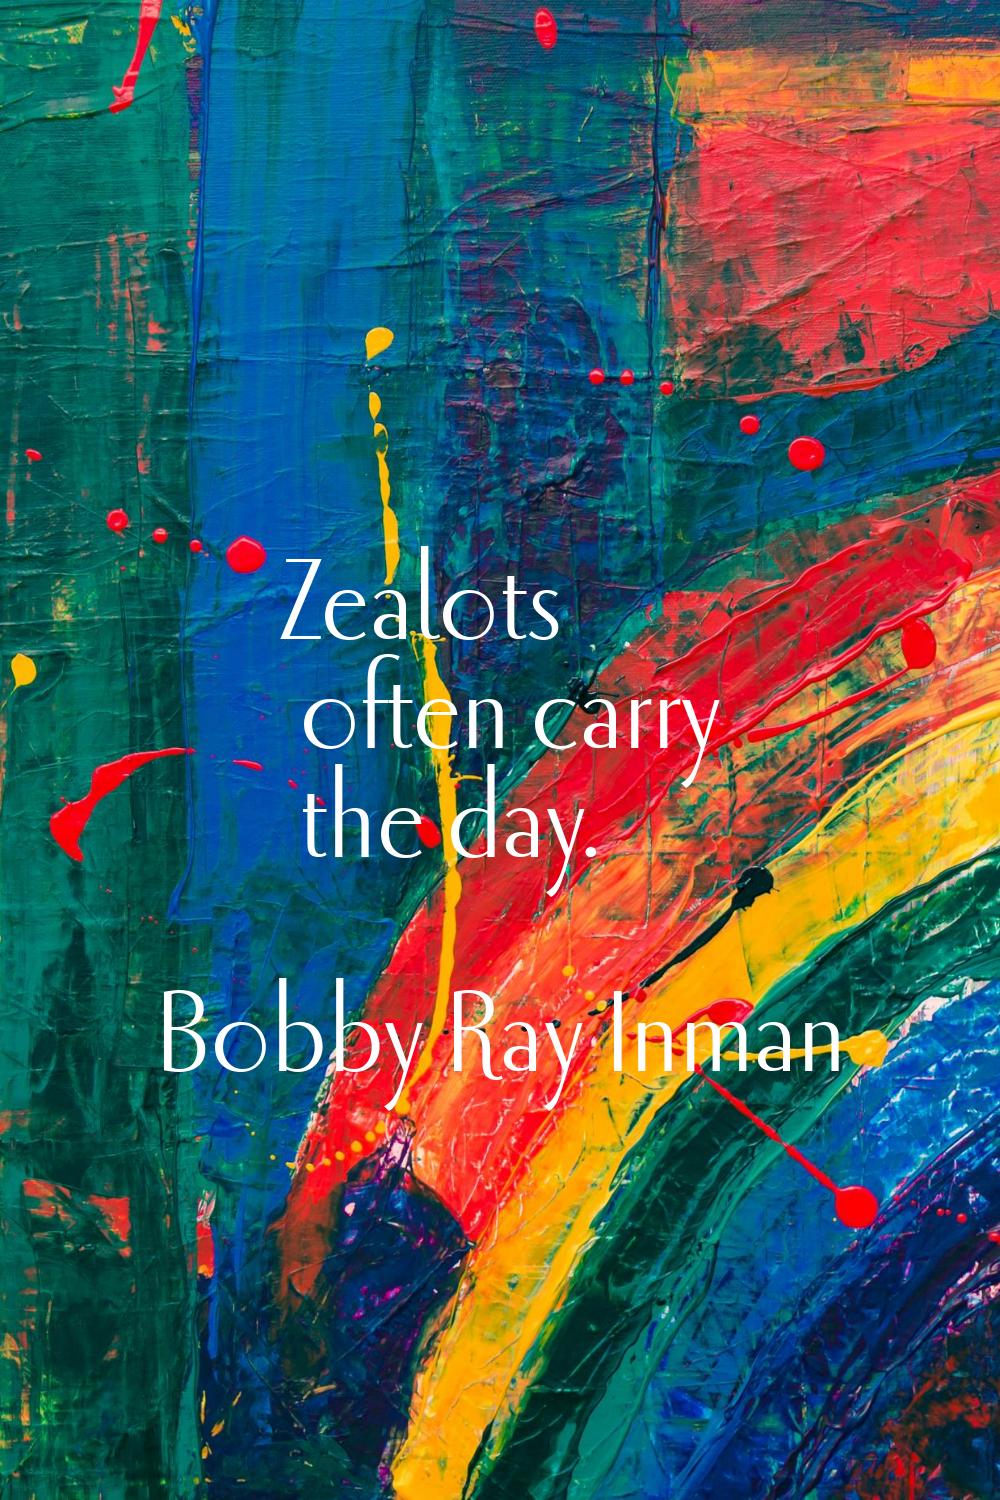 Zealots often carry the day.